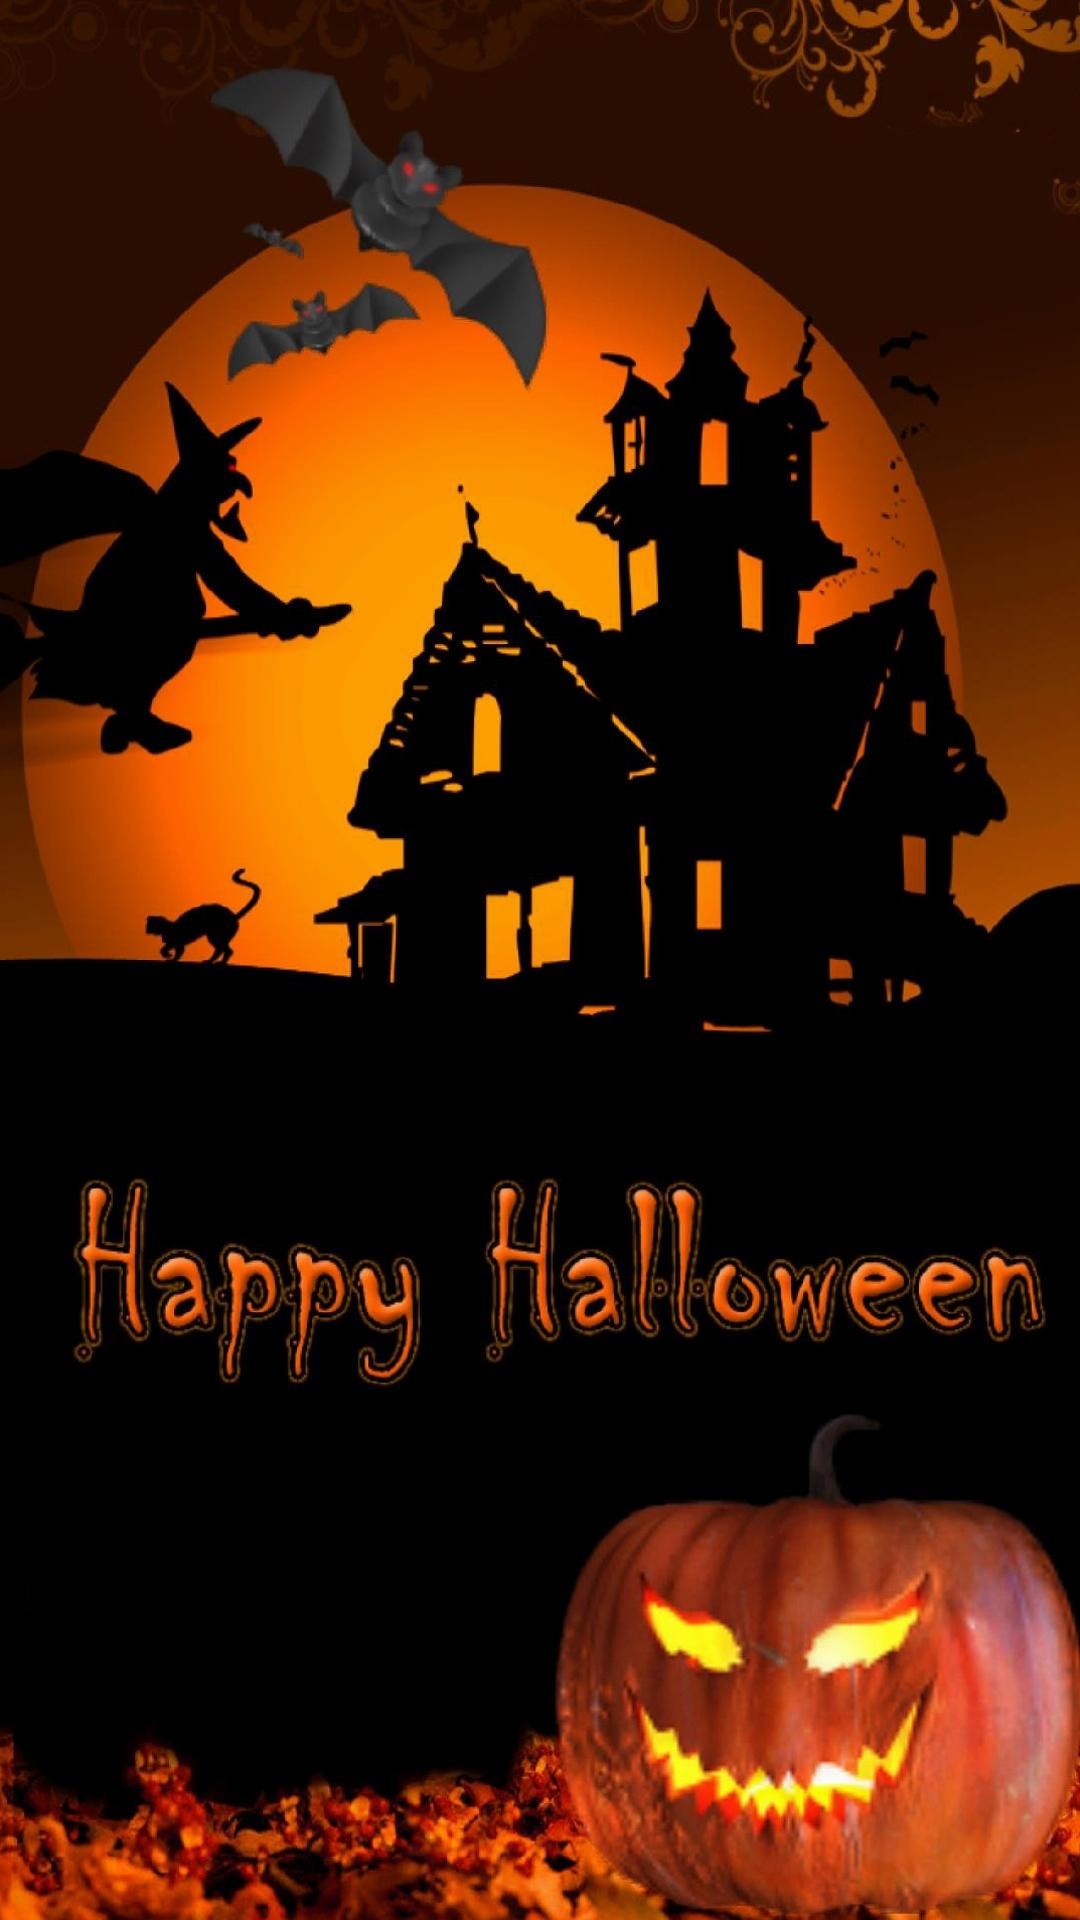 Halloween Wallpapers For Android Smartphone – Androidwallpaper. Halloween Wallpapers For Android Smartphone Androidwallpaper